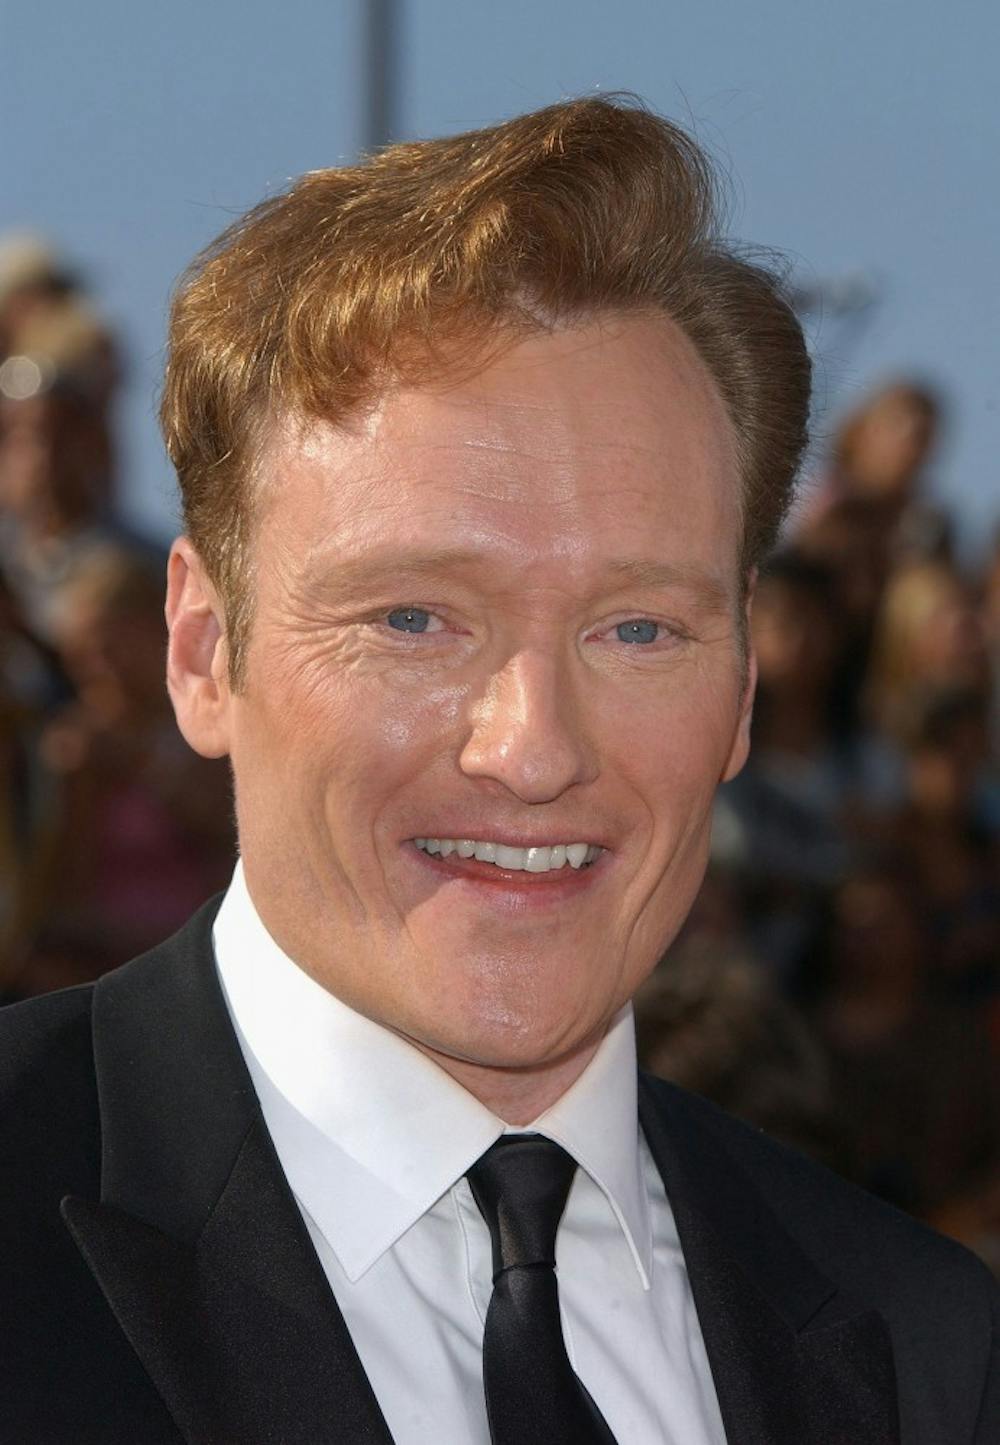 What's next for comedian Conan O'Brien? 